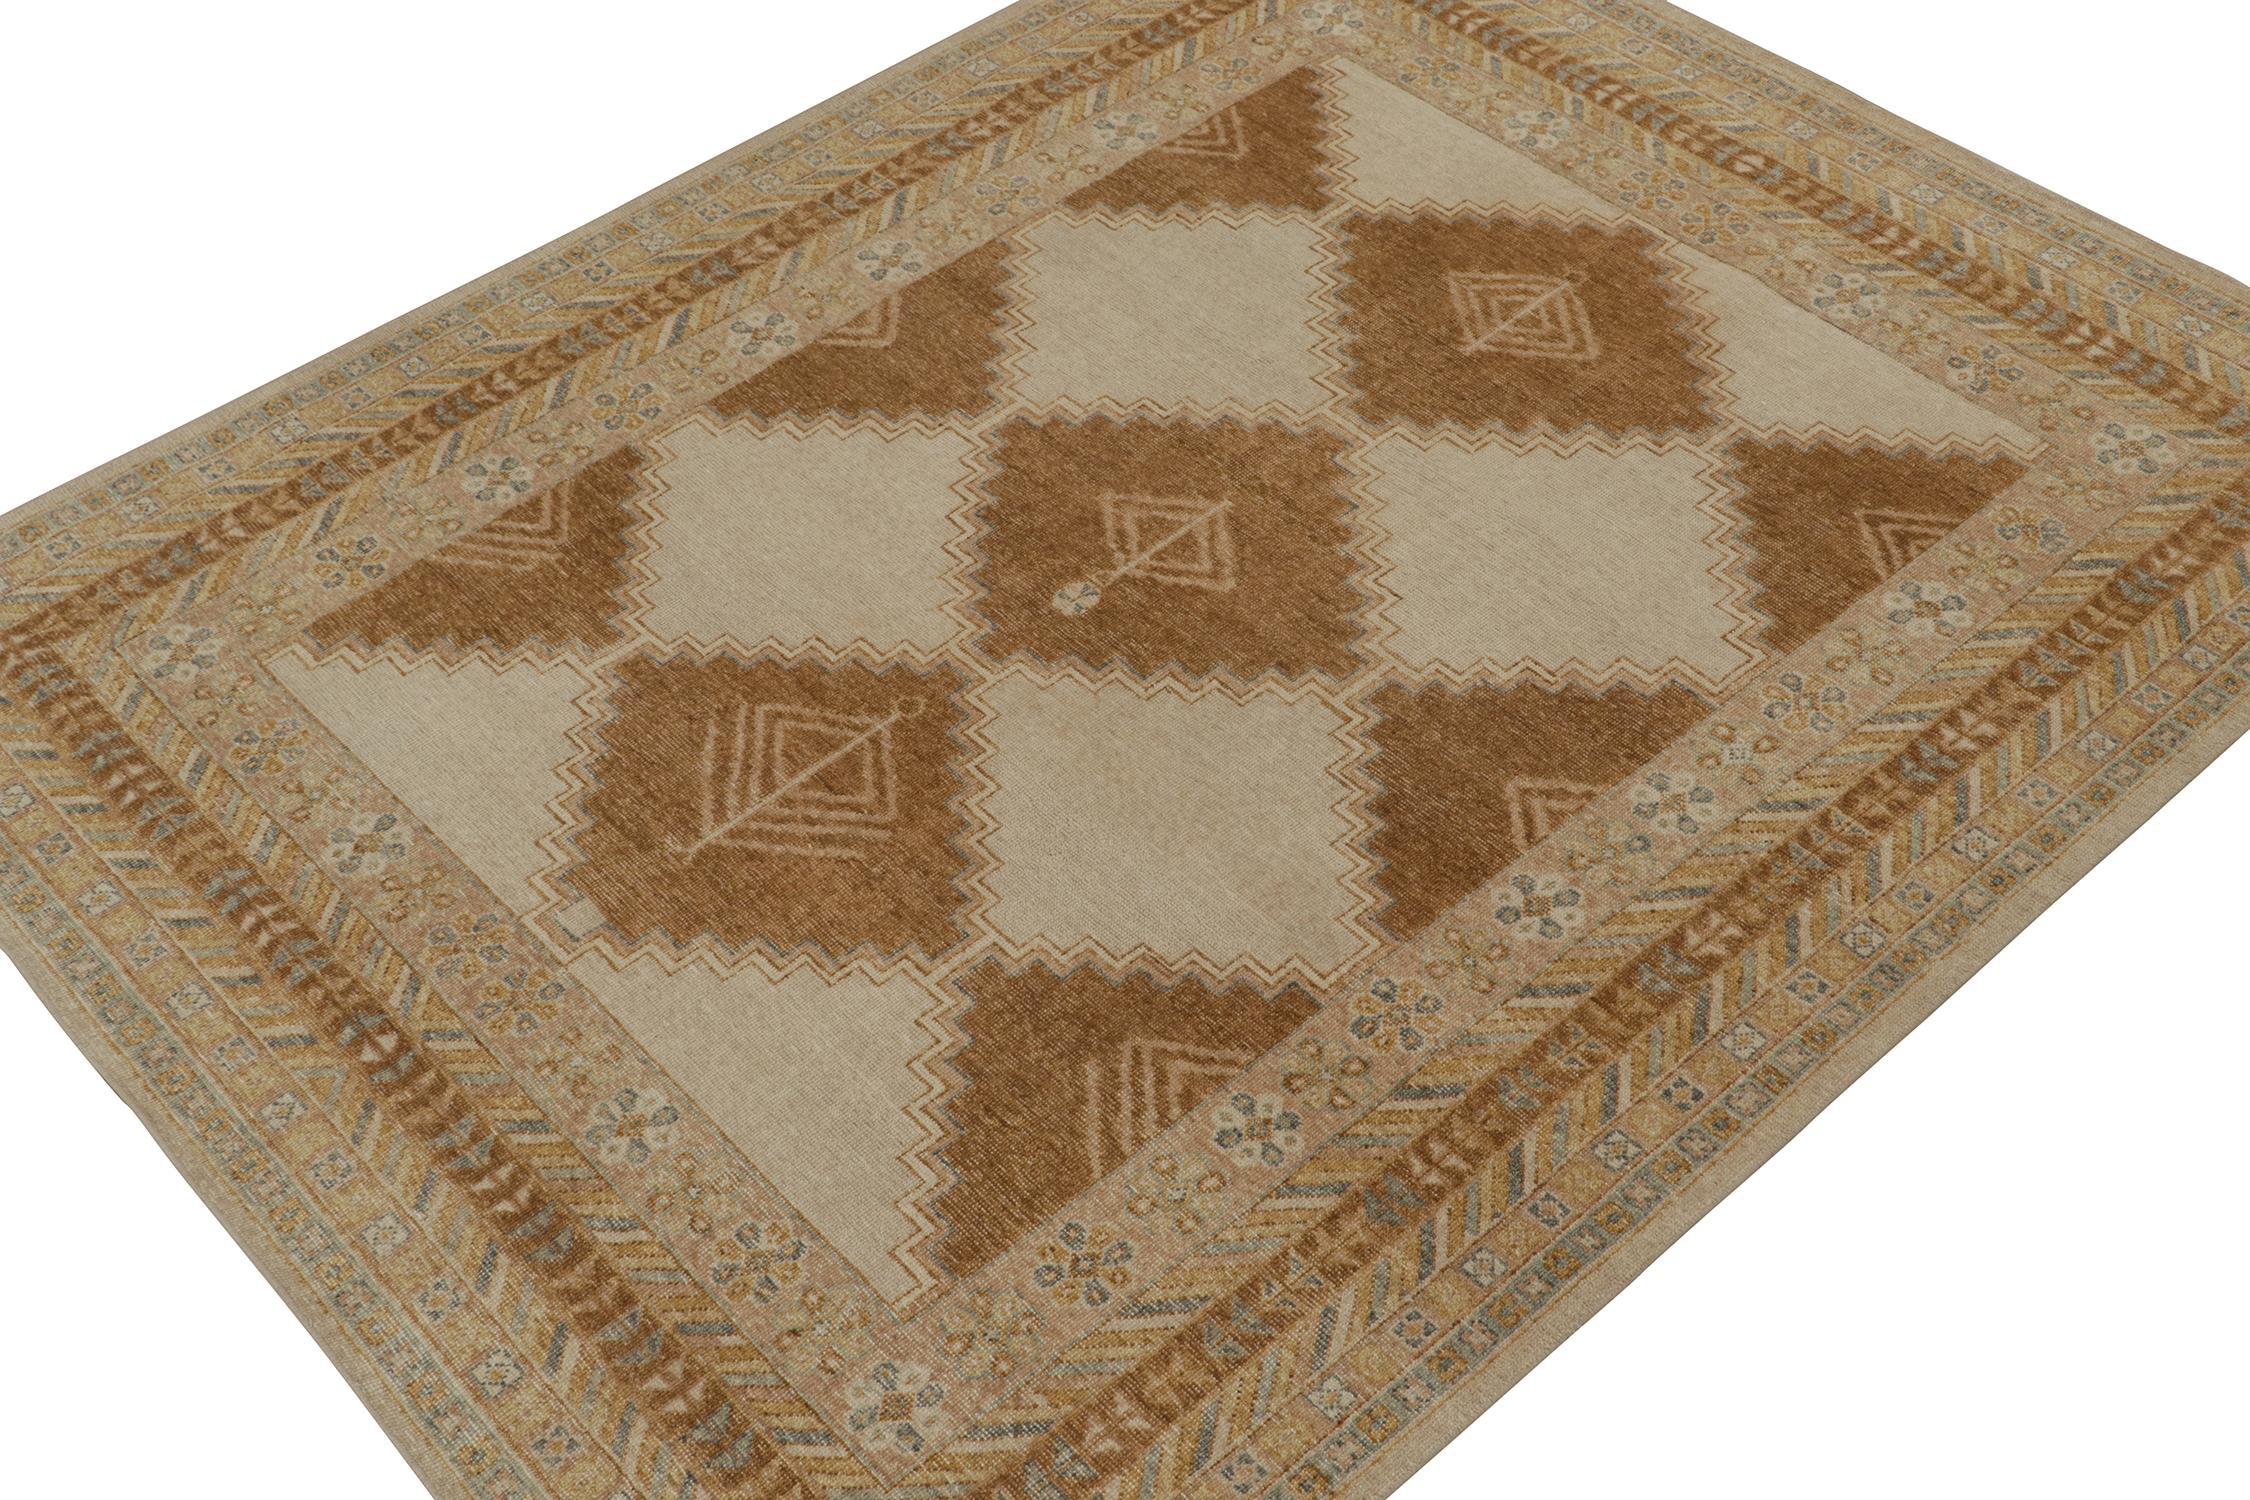 Indian Rug & Kilim’s Distressed Tribal Style Rug in Beige, Brown and Gold Patterns For Sale